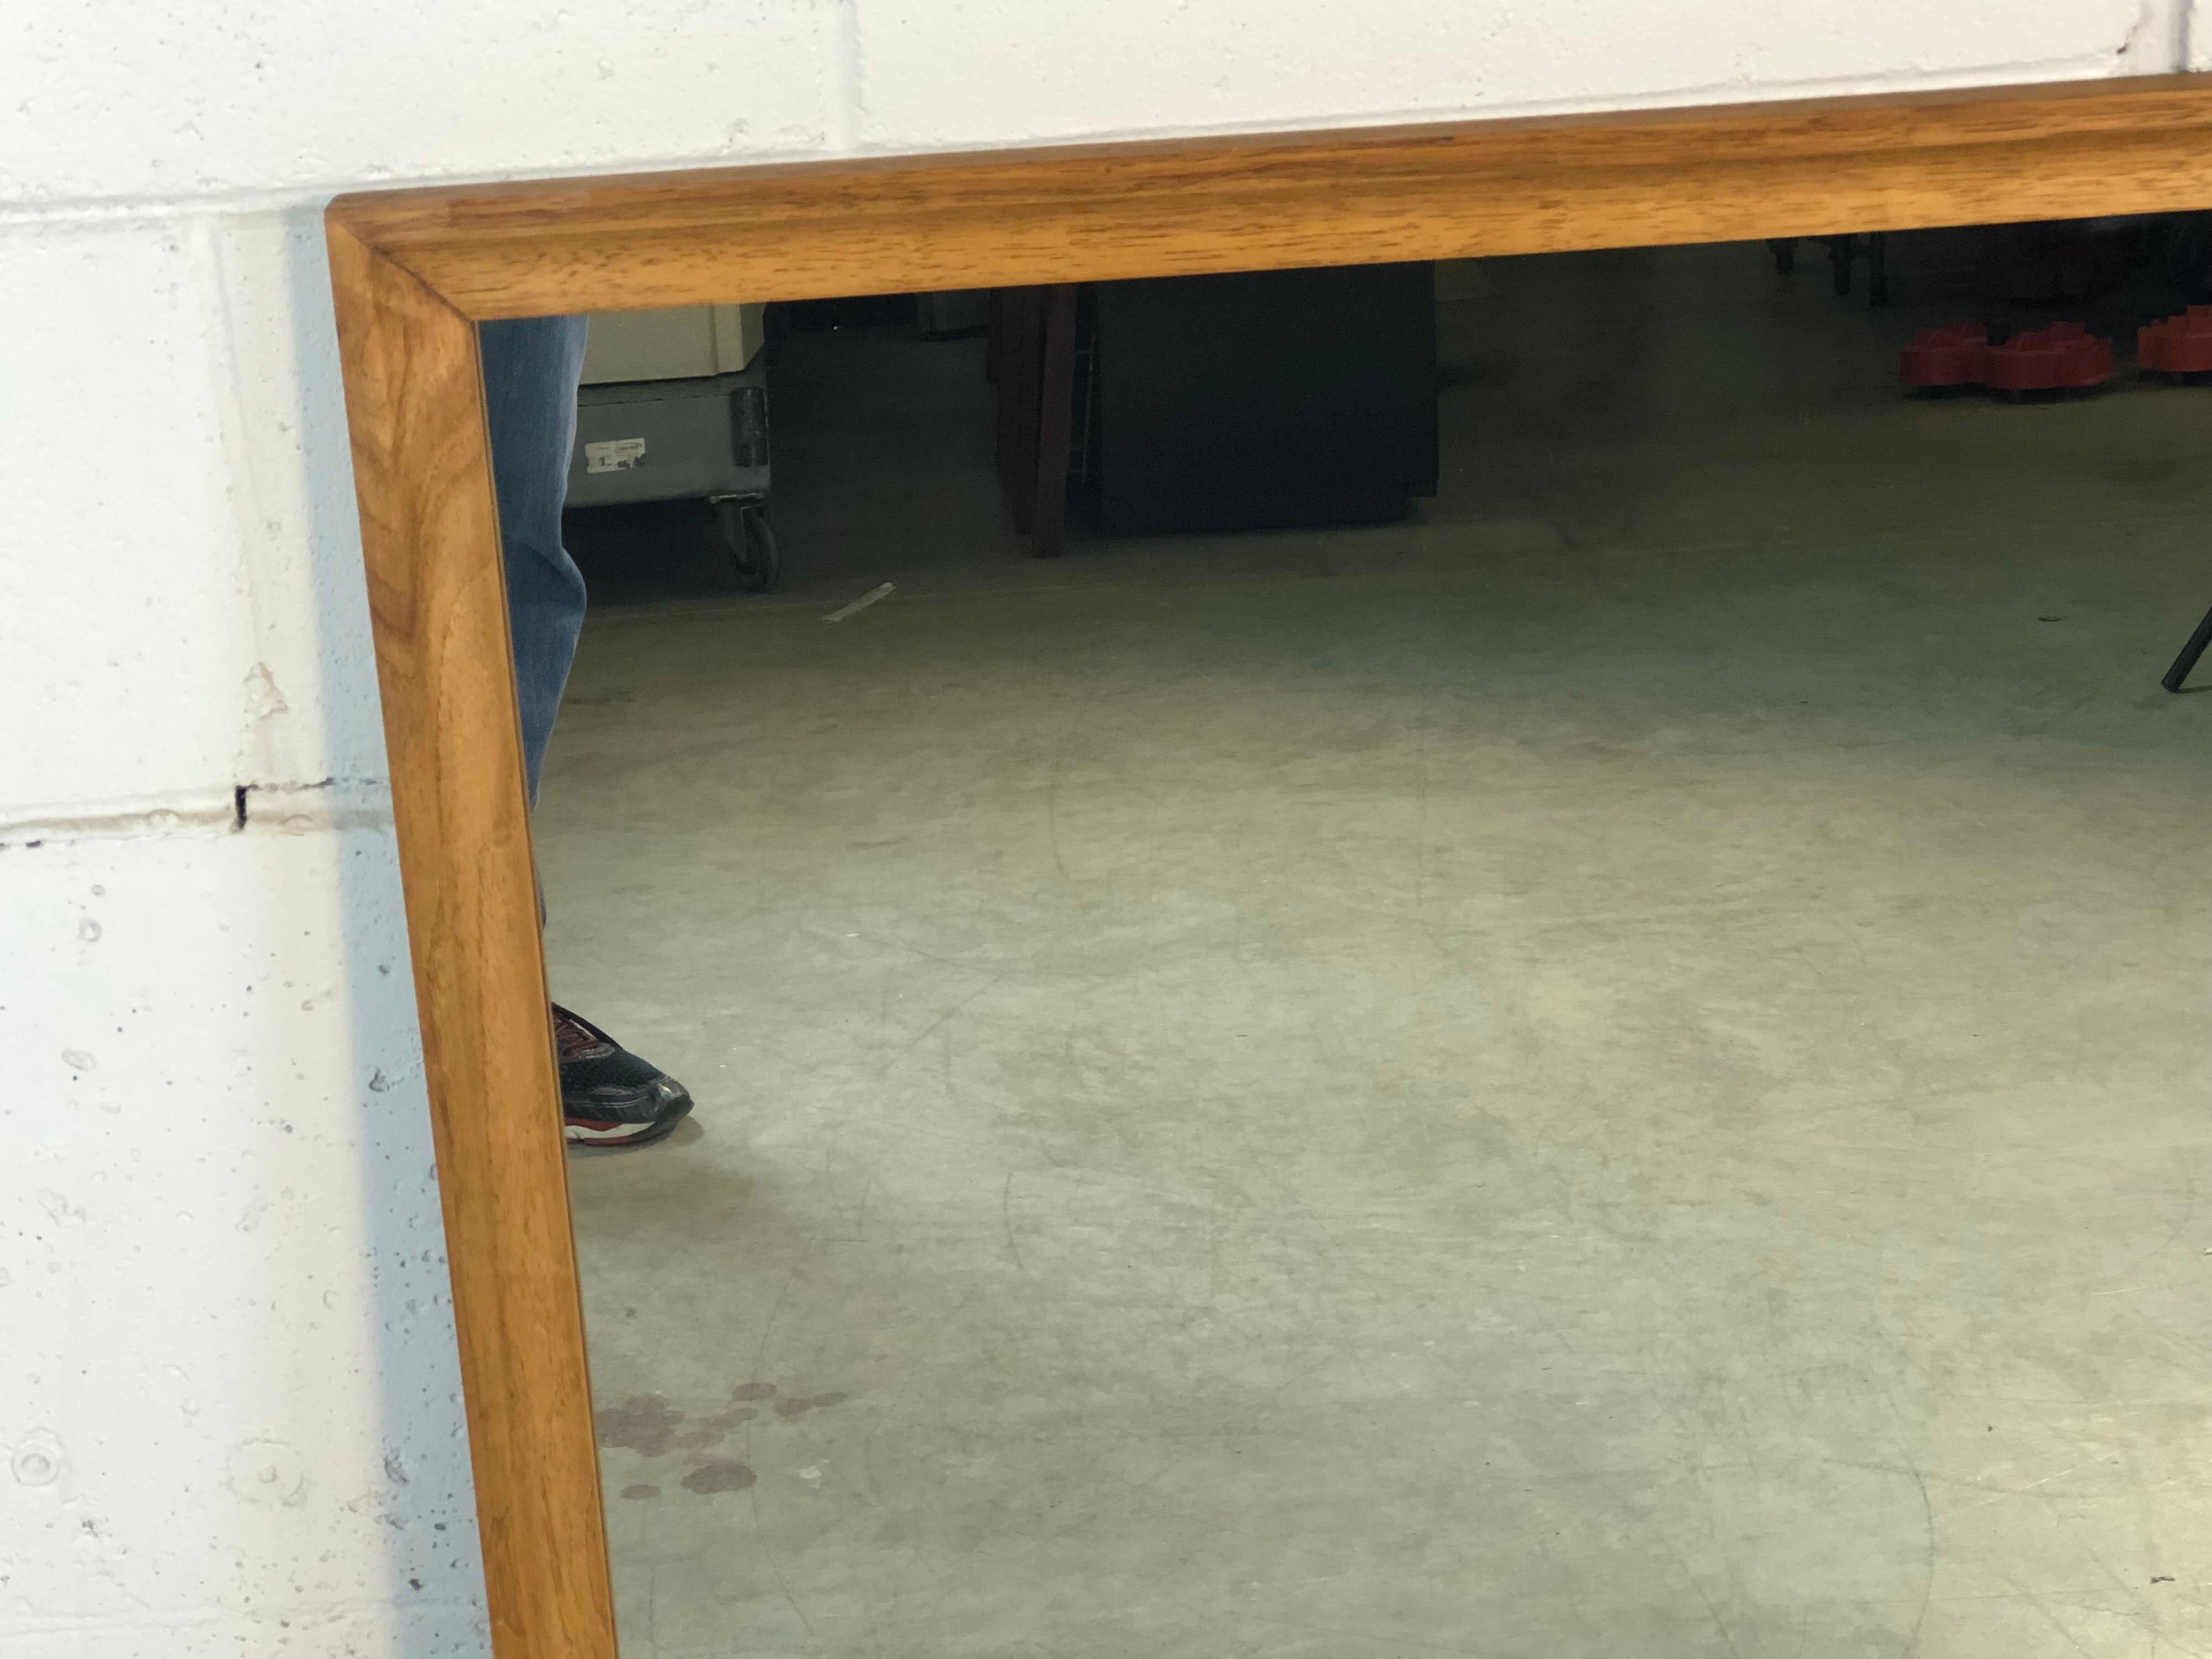 1960s ashwood rectangular wall mirror. No marker mark. Hardware is included. Newly refinished condition.